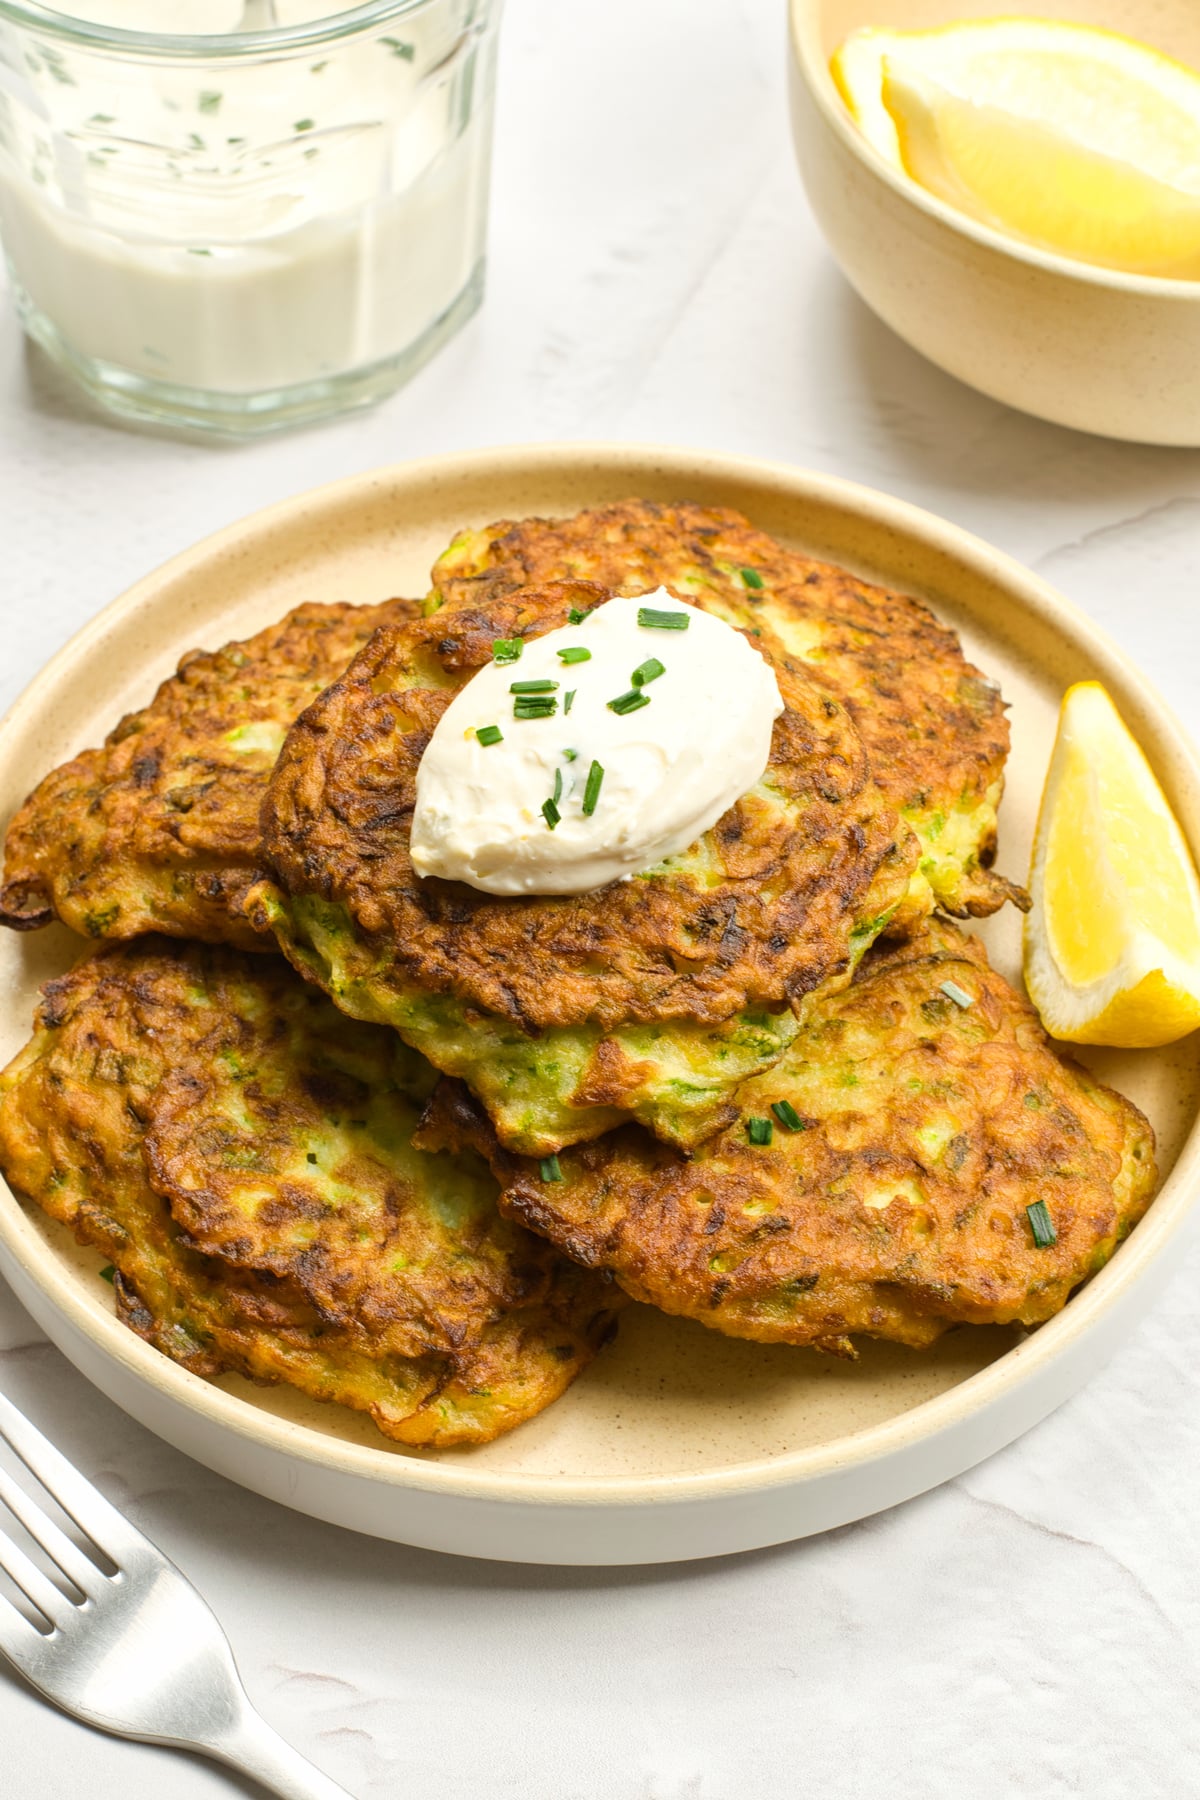 Zucchini Fritters on a serving plate with utensils on the side.